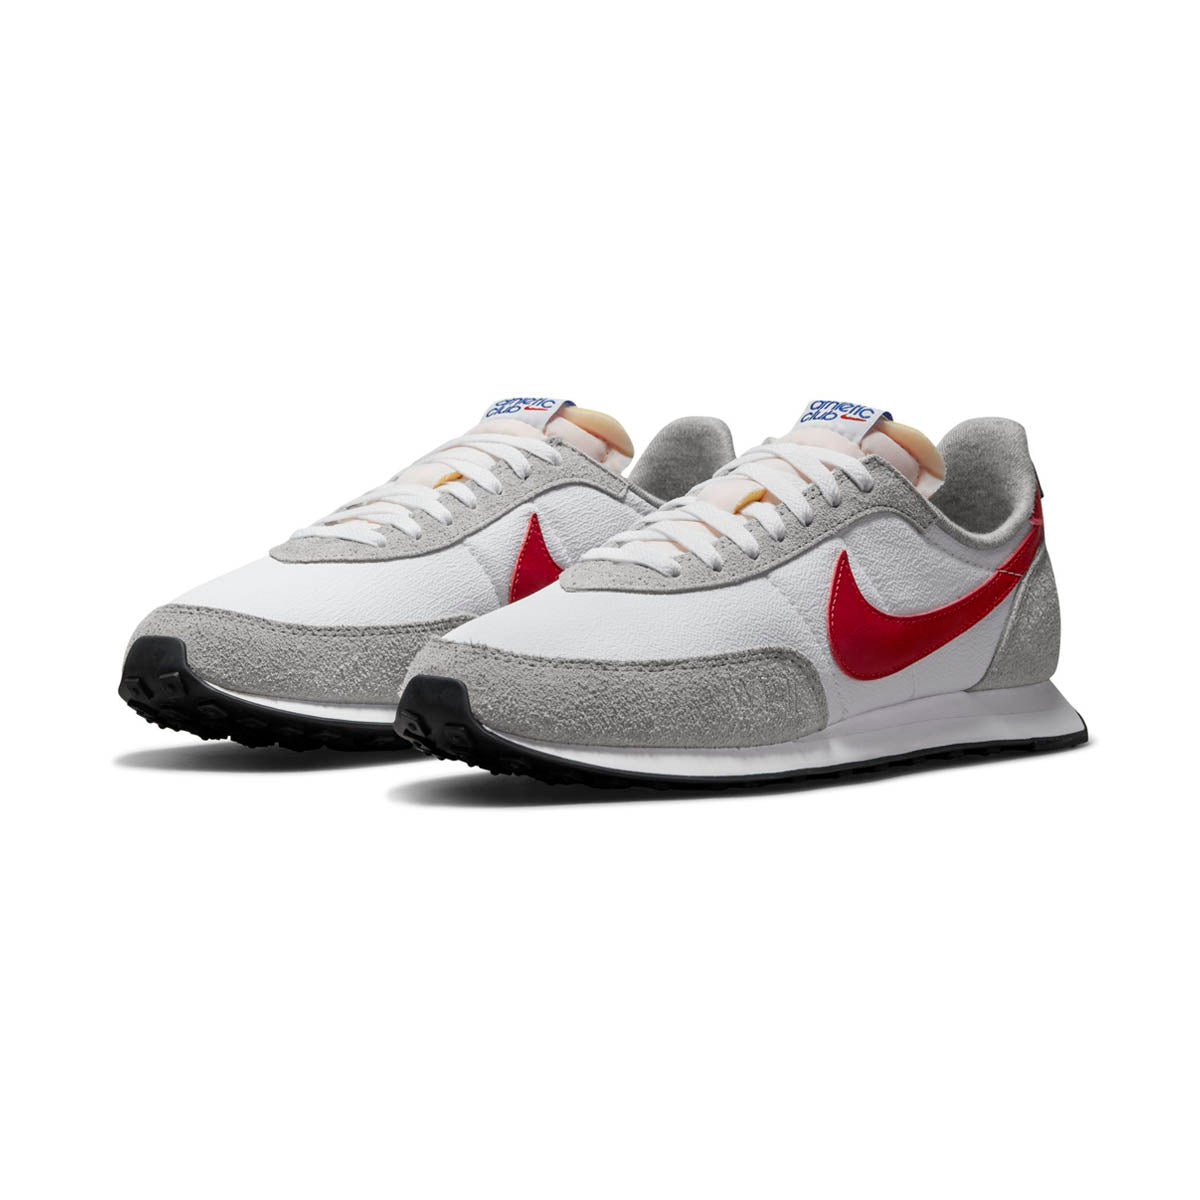 Nike Men's Waffle Trainer 2 Shoes